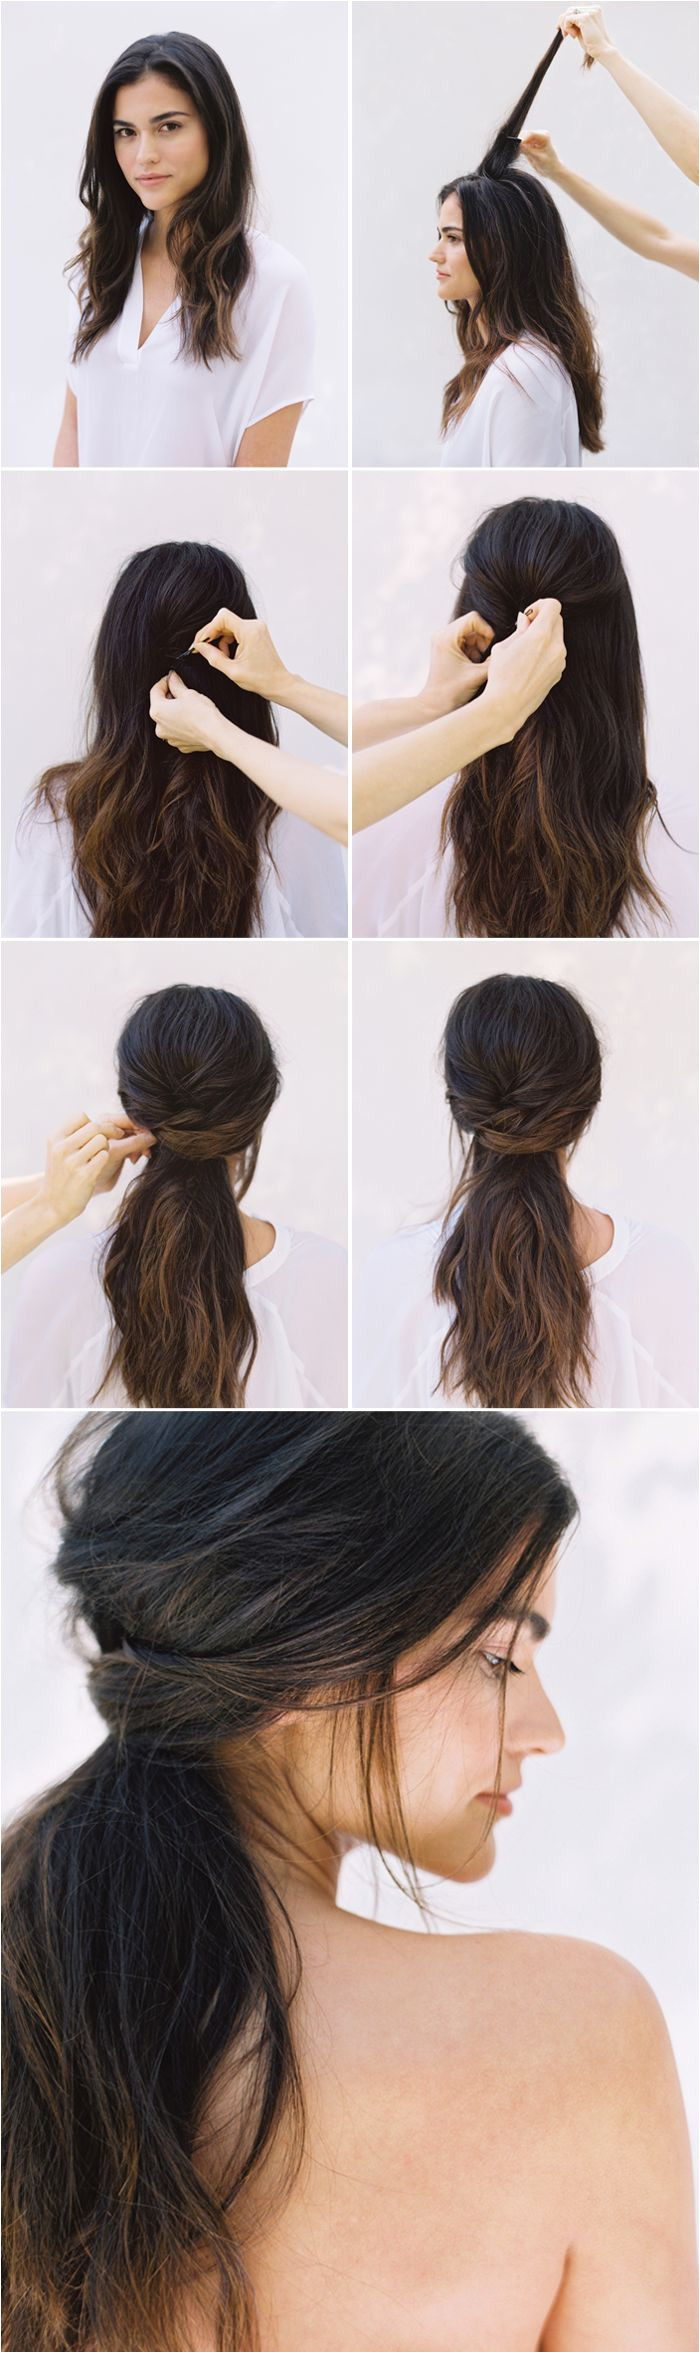 Simple Half Up And Half Down Wedding Hairstyles